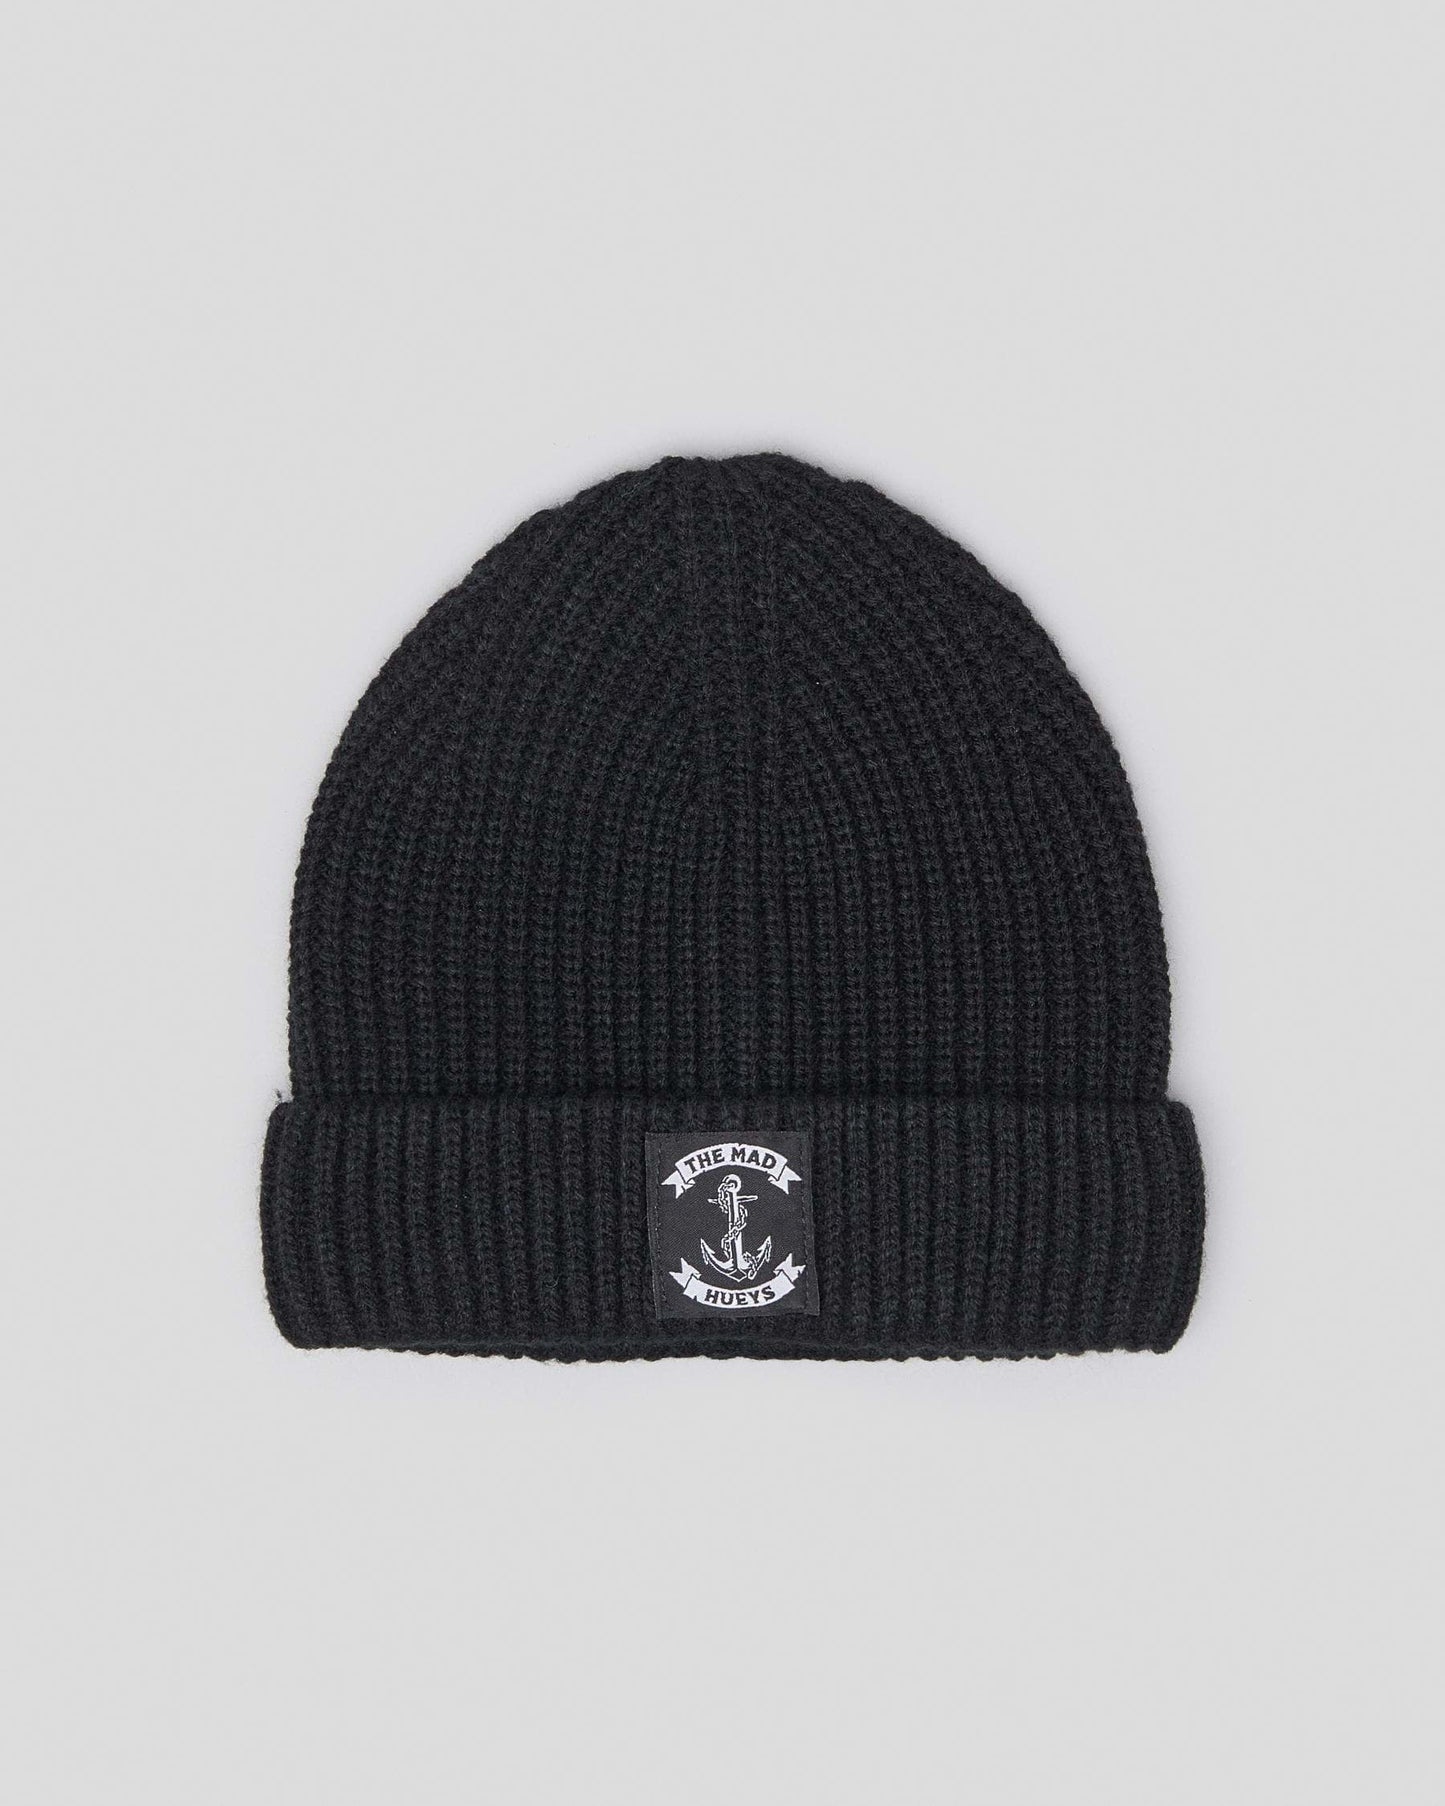 THE MAD HUEYS Anchor Roll Up Youth Beanie - Black